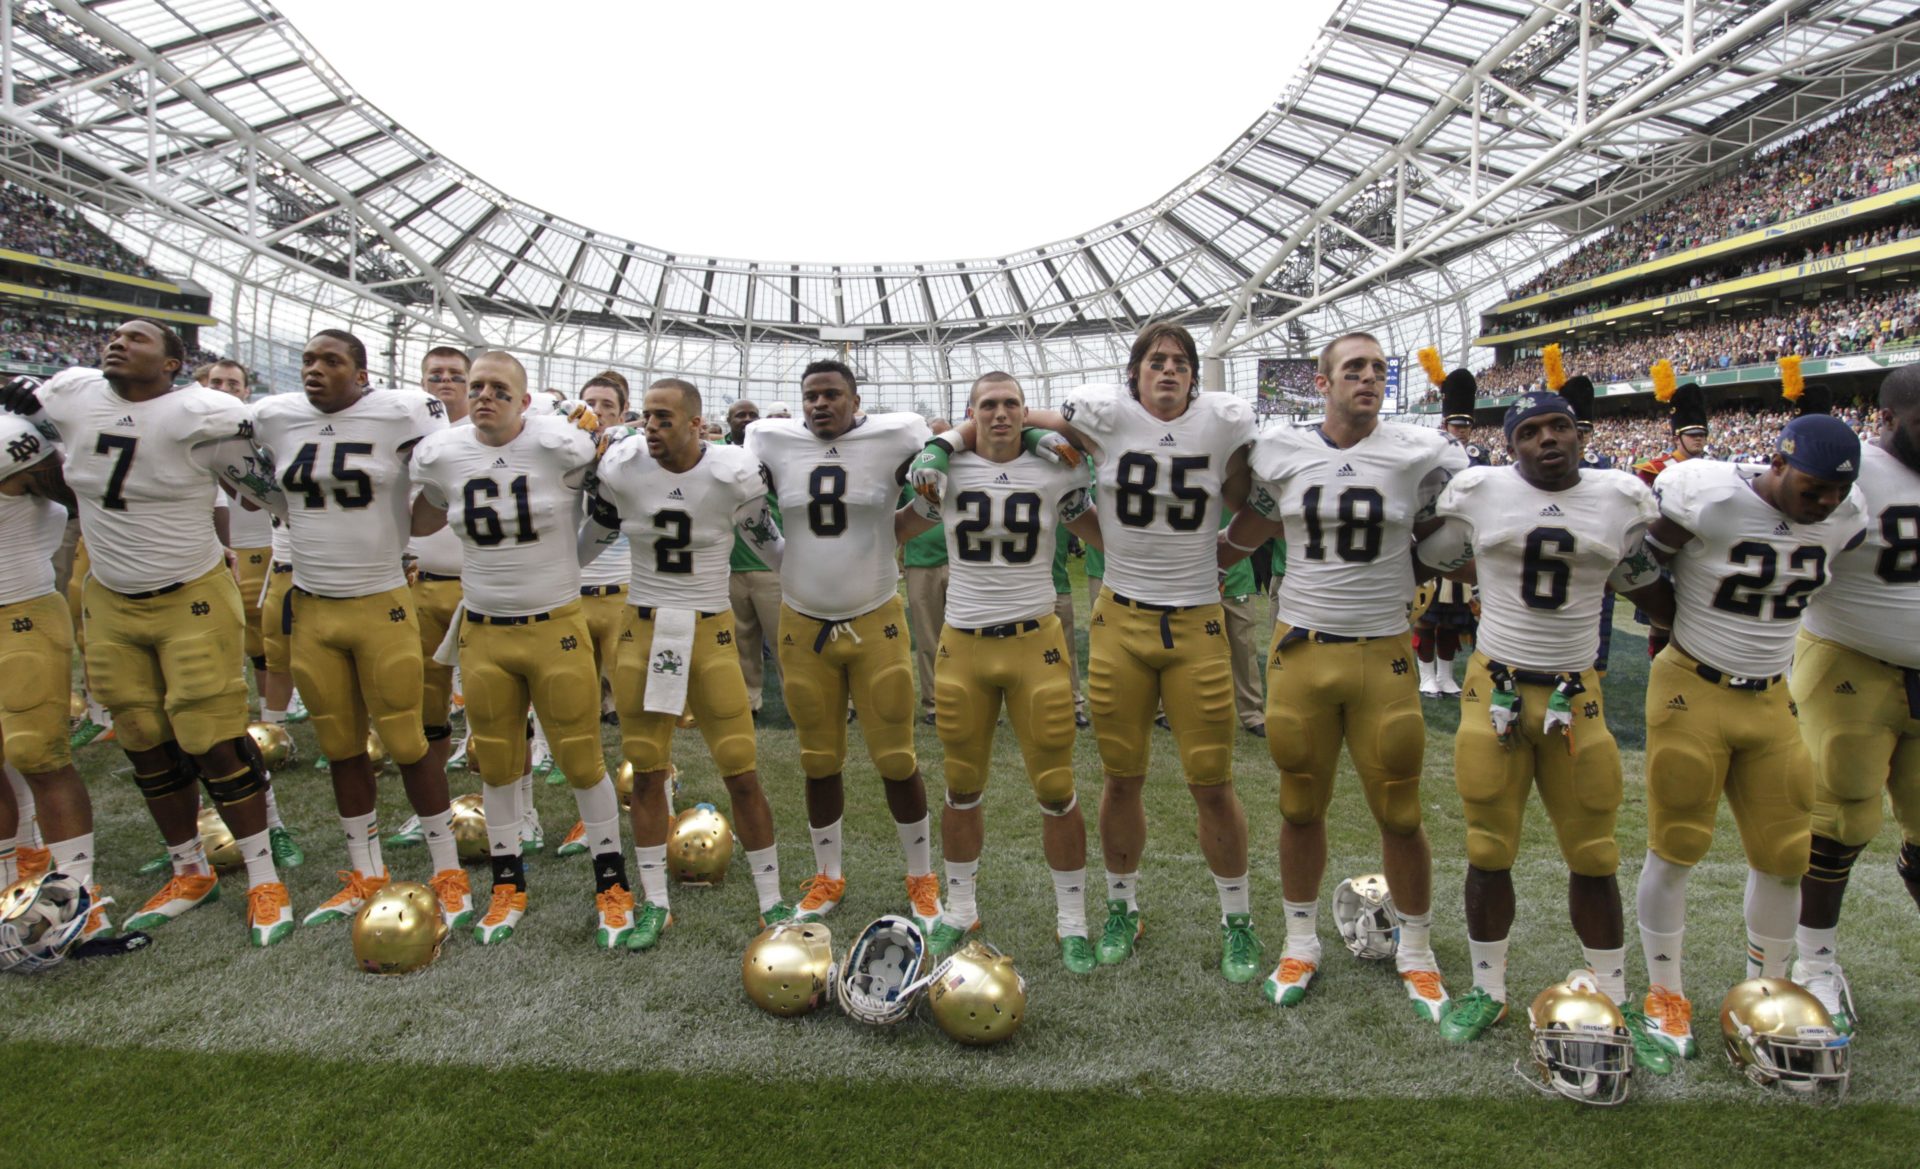 This place is nuts' - 40,000 Americans descend on Dublin for college football match | Newstalk